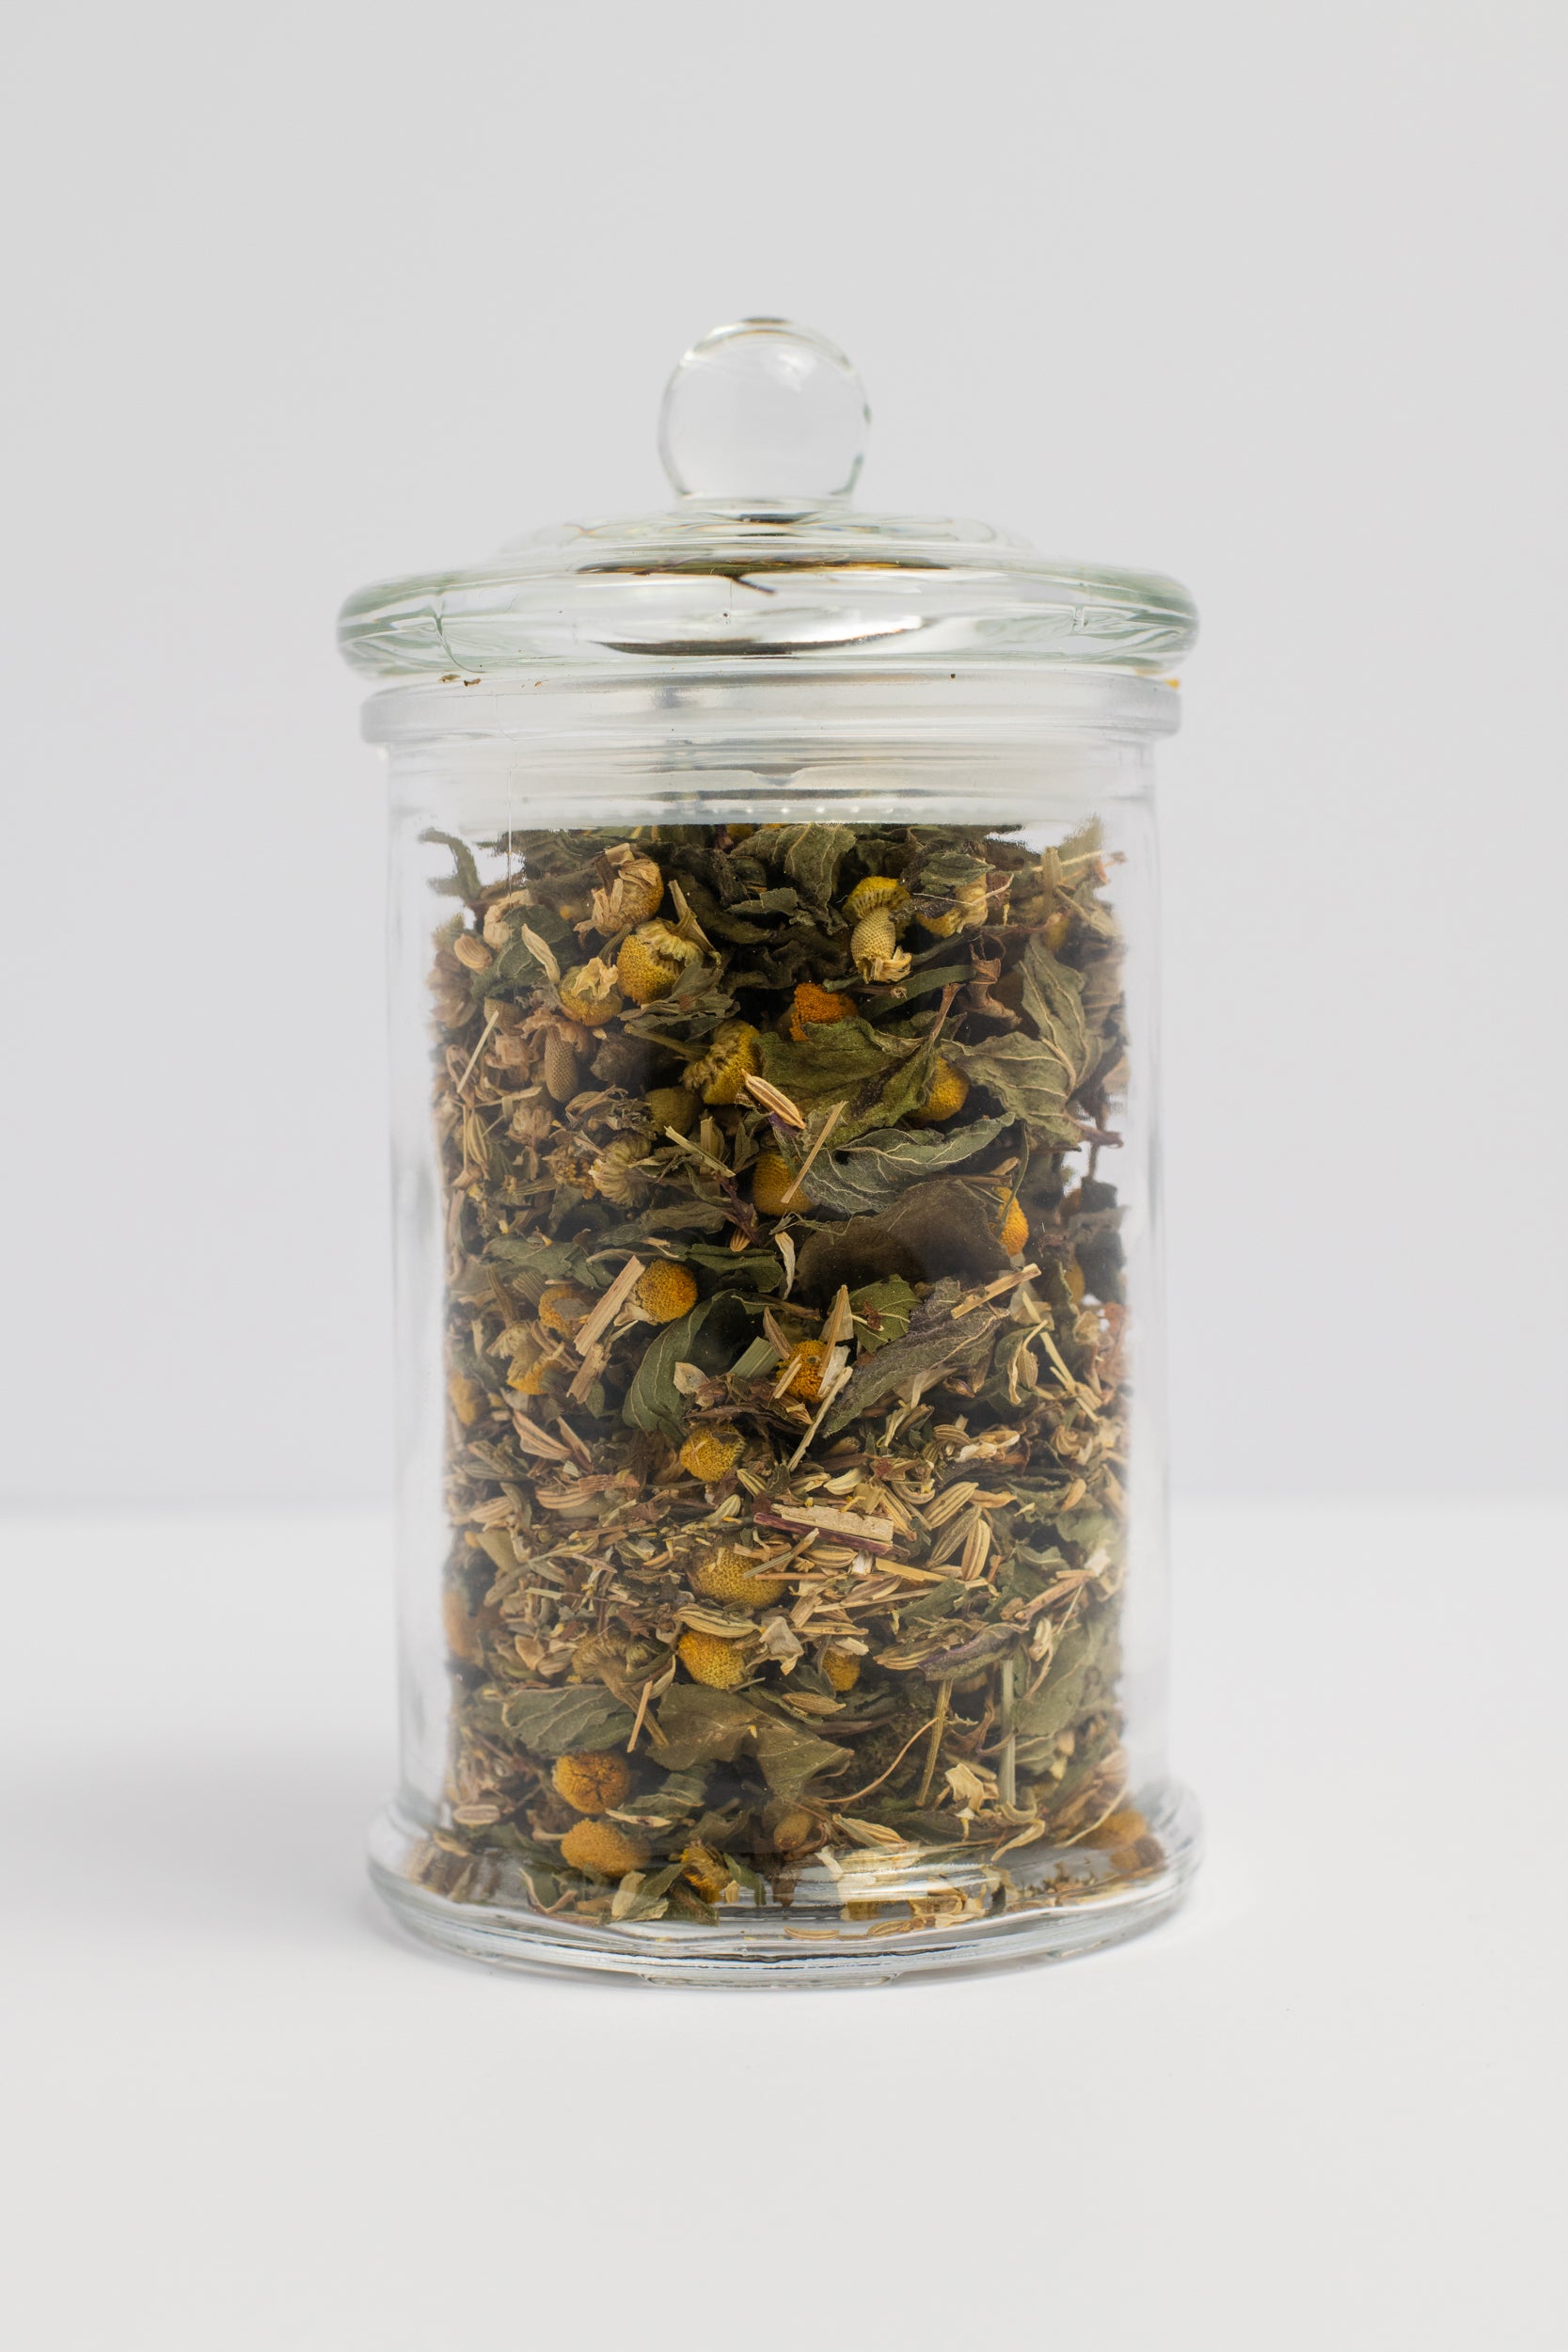 bespoke herbal tea, infusion, tissane, small batch, bespoke, artisan, dried herbs, herbal medicine, made to order, tailor made, organic, detoxification, digest, digestion, rest, relax, calm, sleep, sedative, insomnia, nervous system support. Chamomile, Fennel, Peppermint, Meadowsweet. Carminative, relieves gas and bloating, gastrointestinal health, after dinner. loose leaf tea.